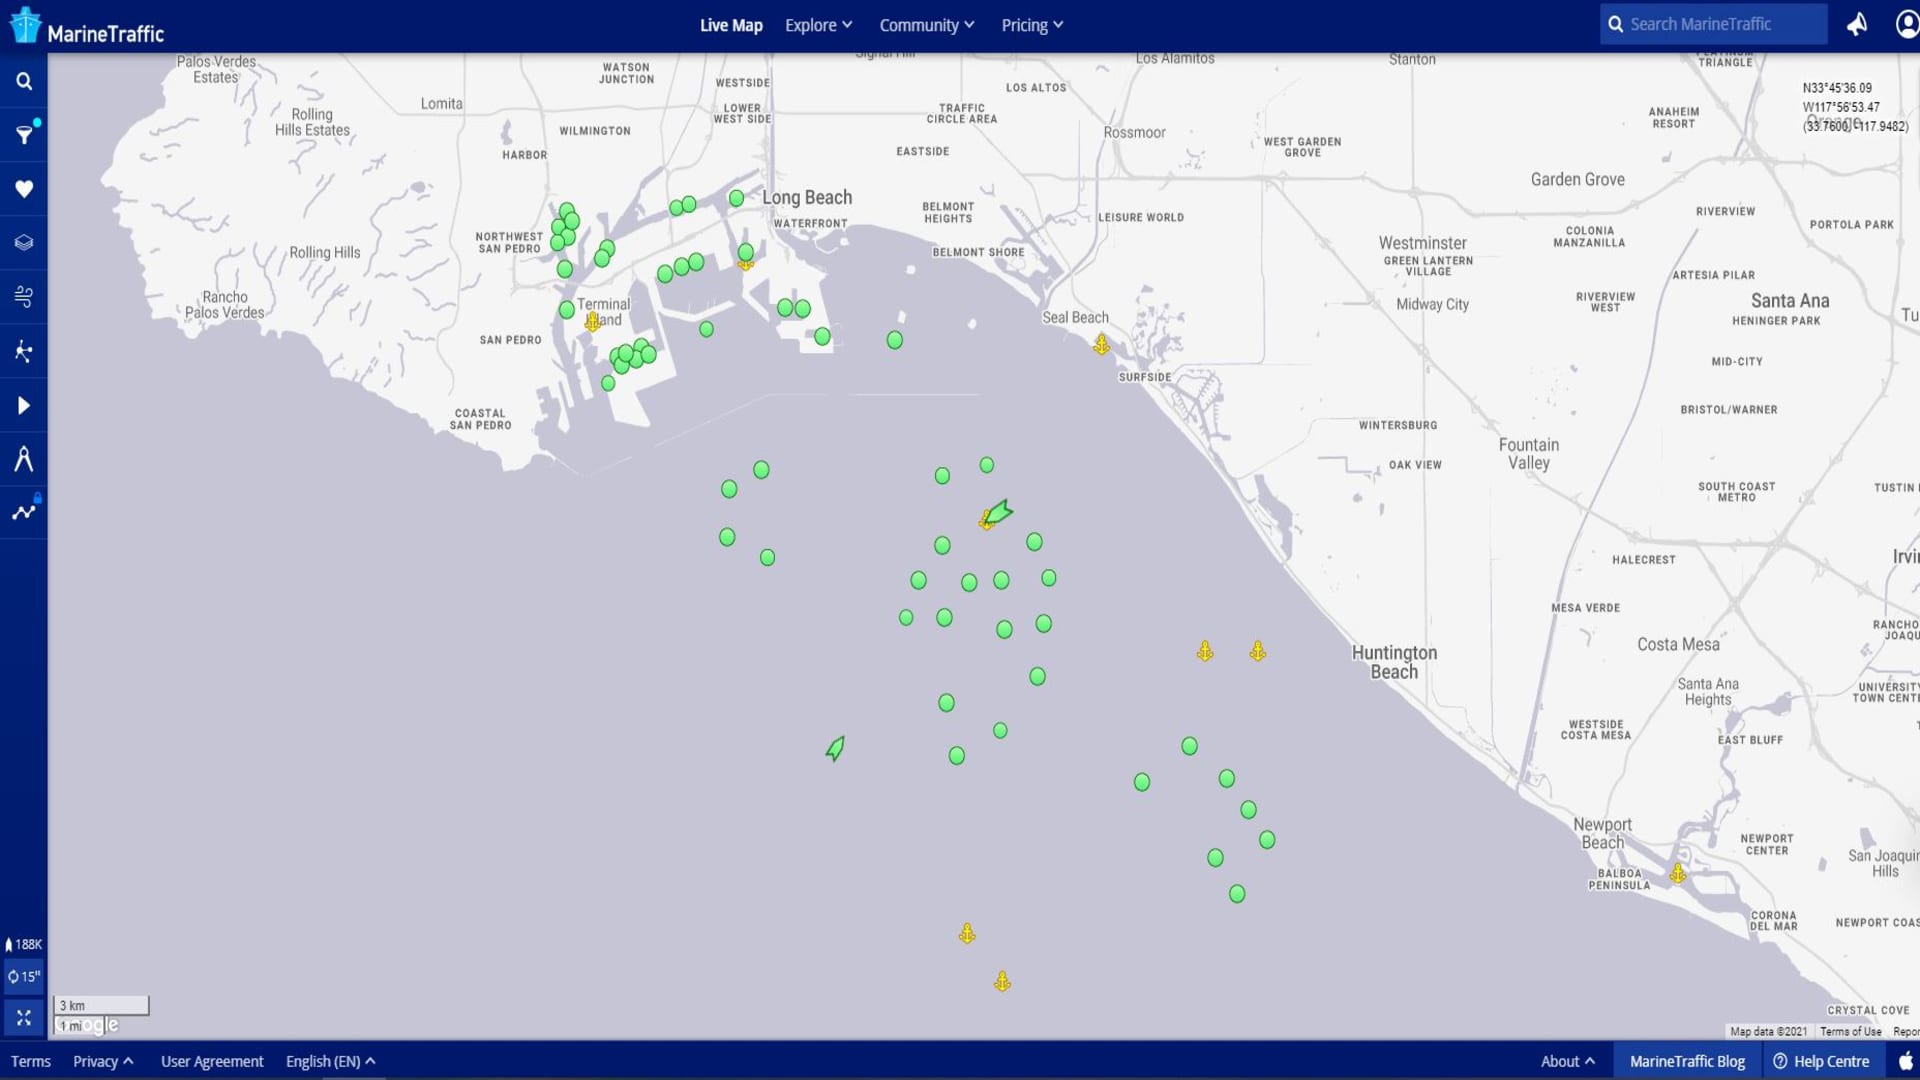 Cargo ships waiting to dock outside of the ports of Los Angeles and Long Beach as of March 1, 2021.